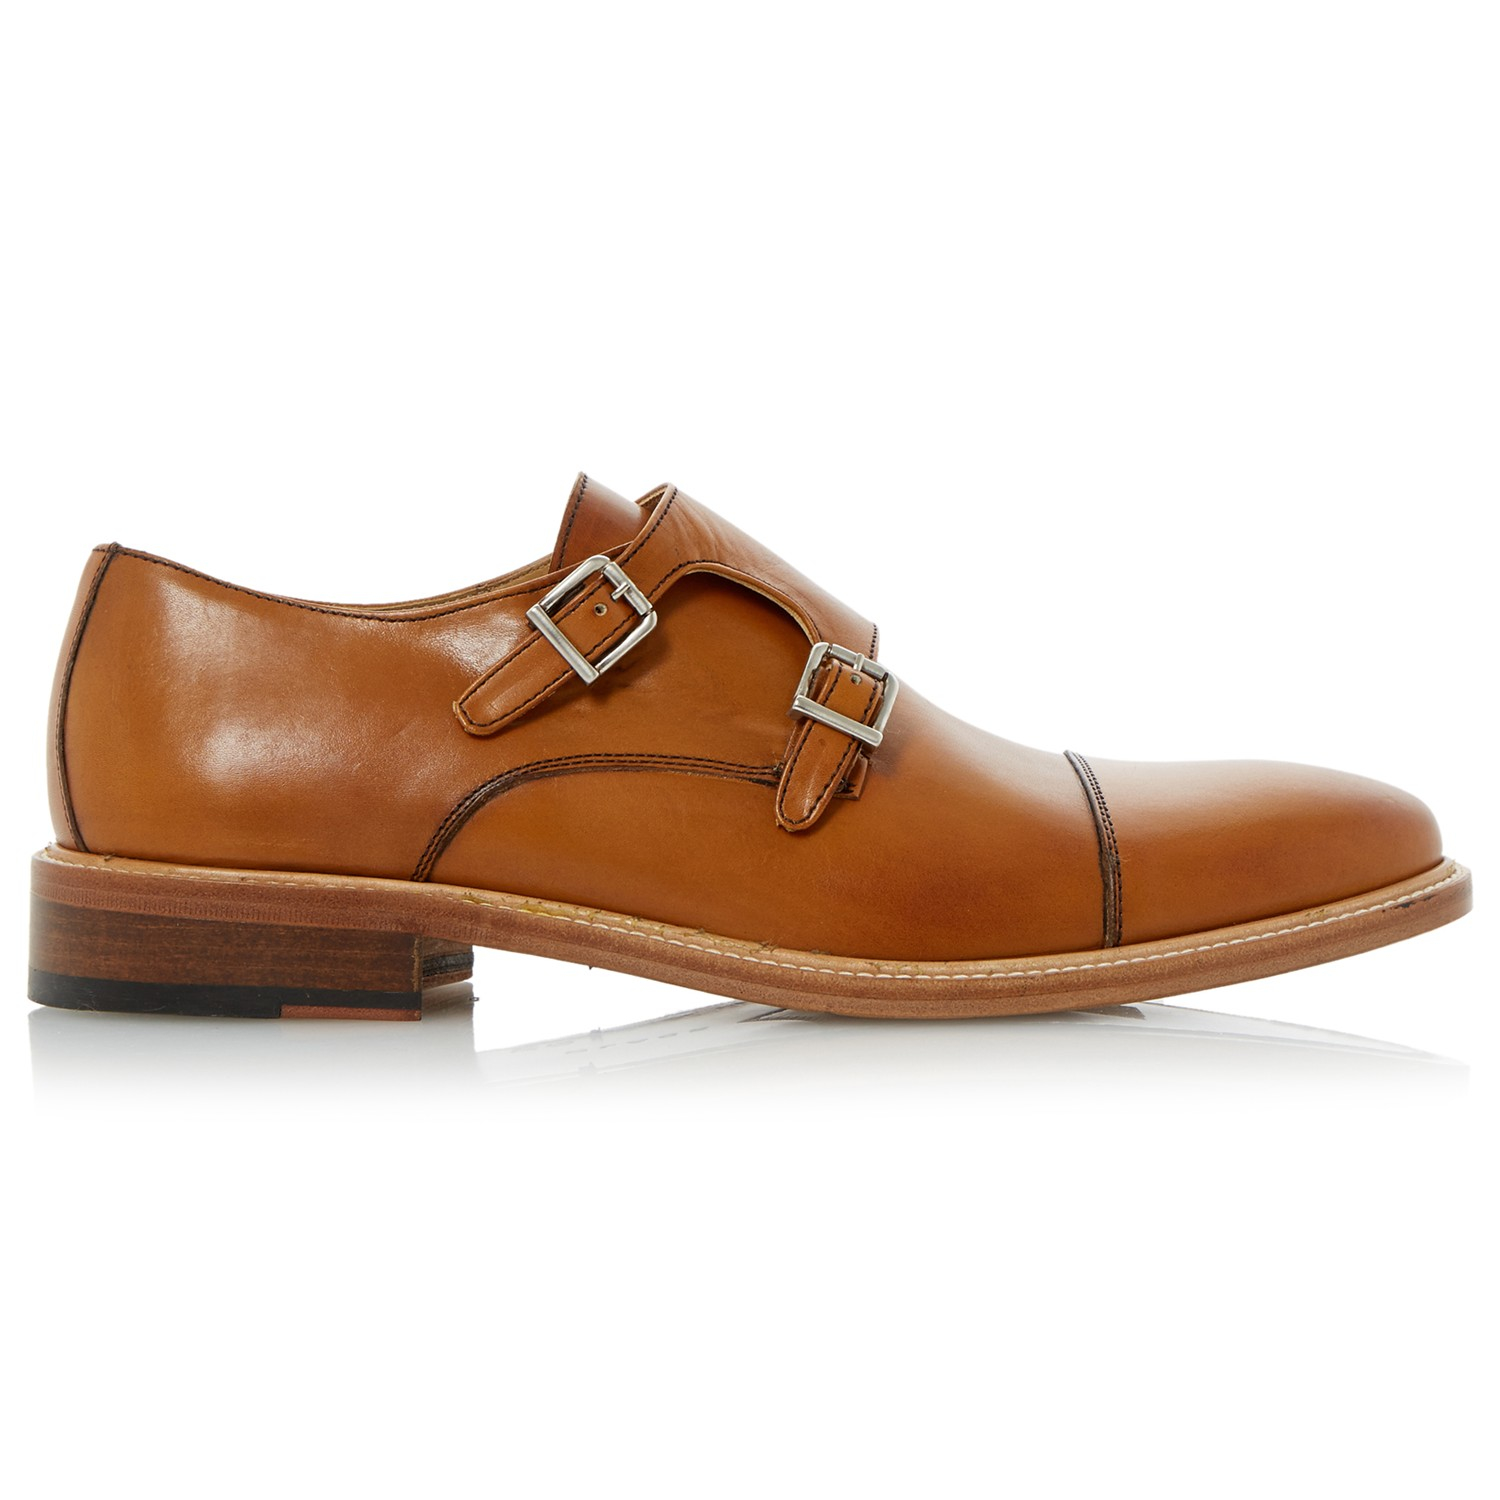  Dune  Black Rushmore Leather Double Buckle Monk Shoes  in 